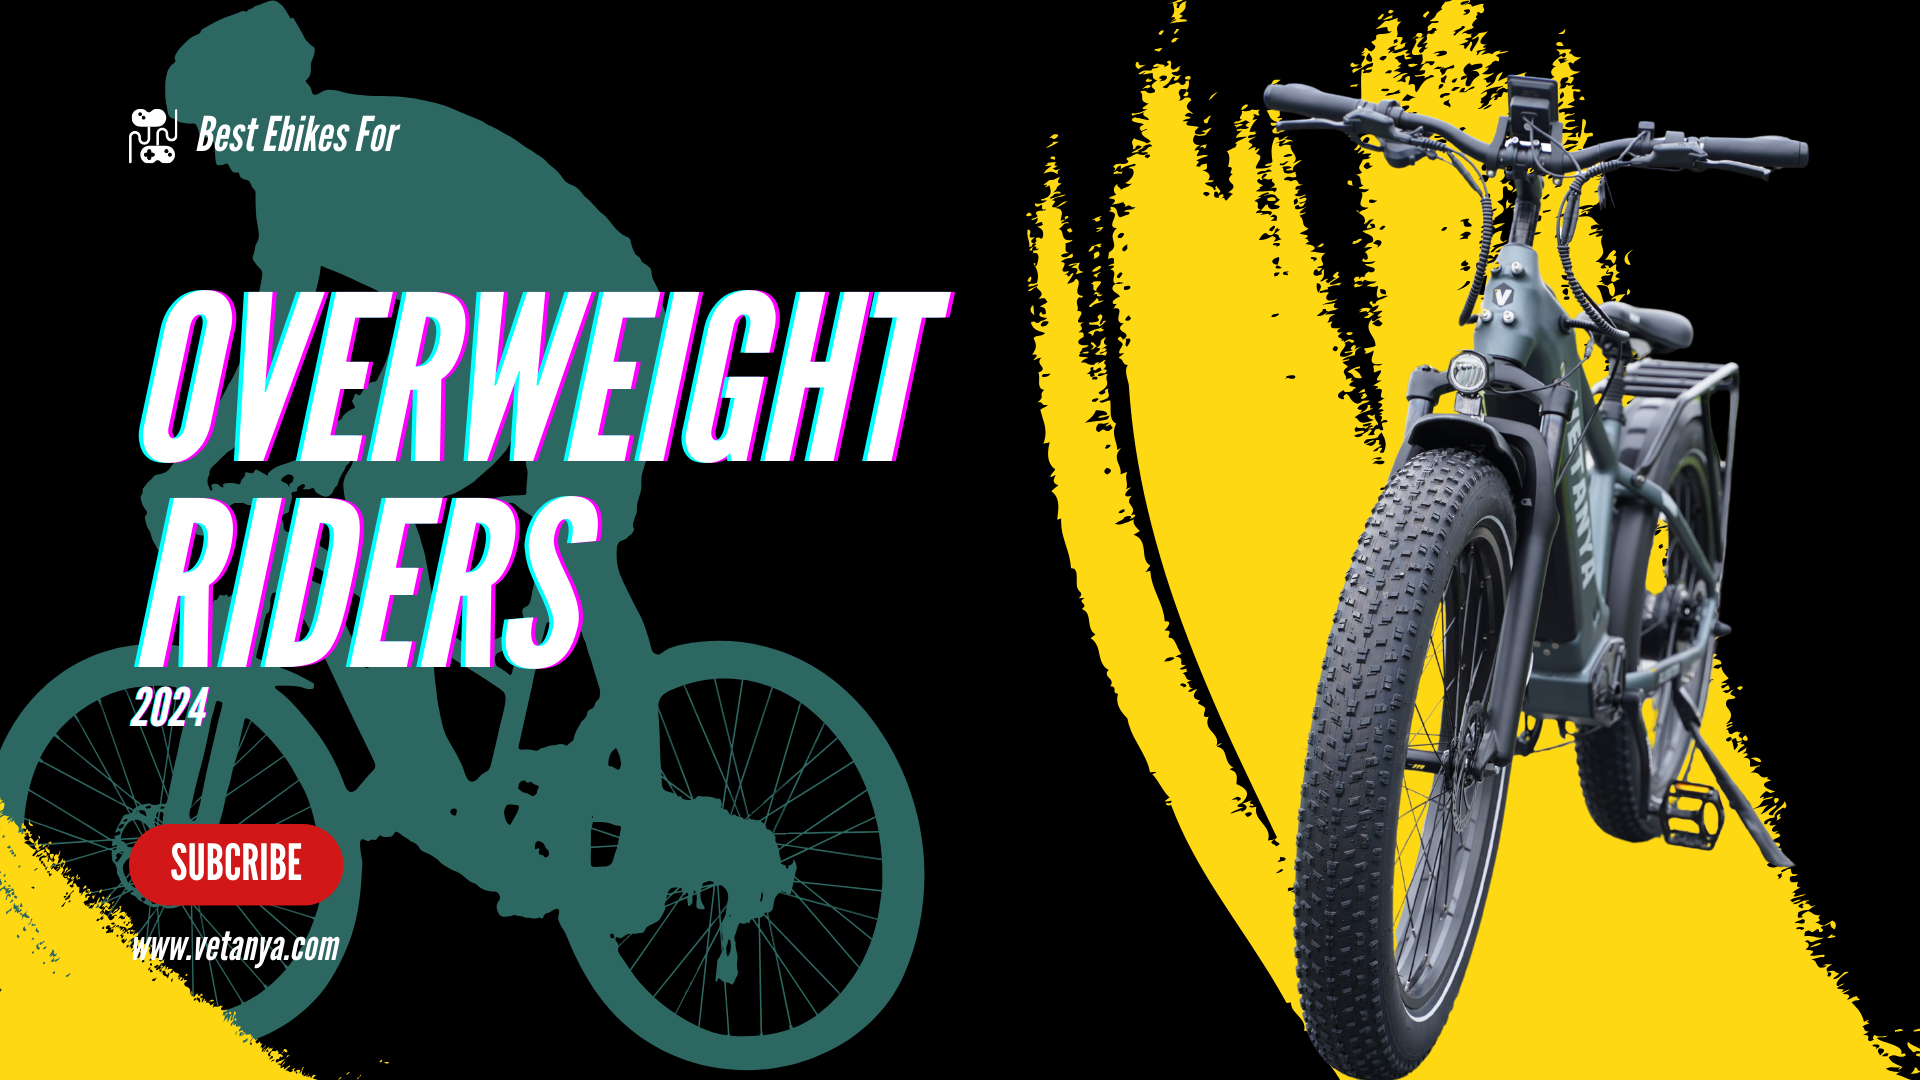 Best Electric Bikes for Overweight Riders 2024